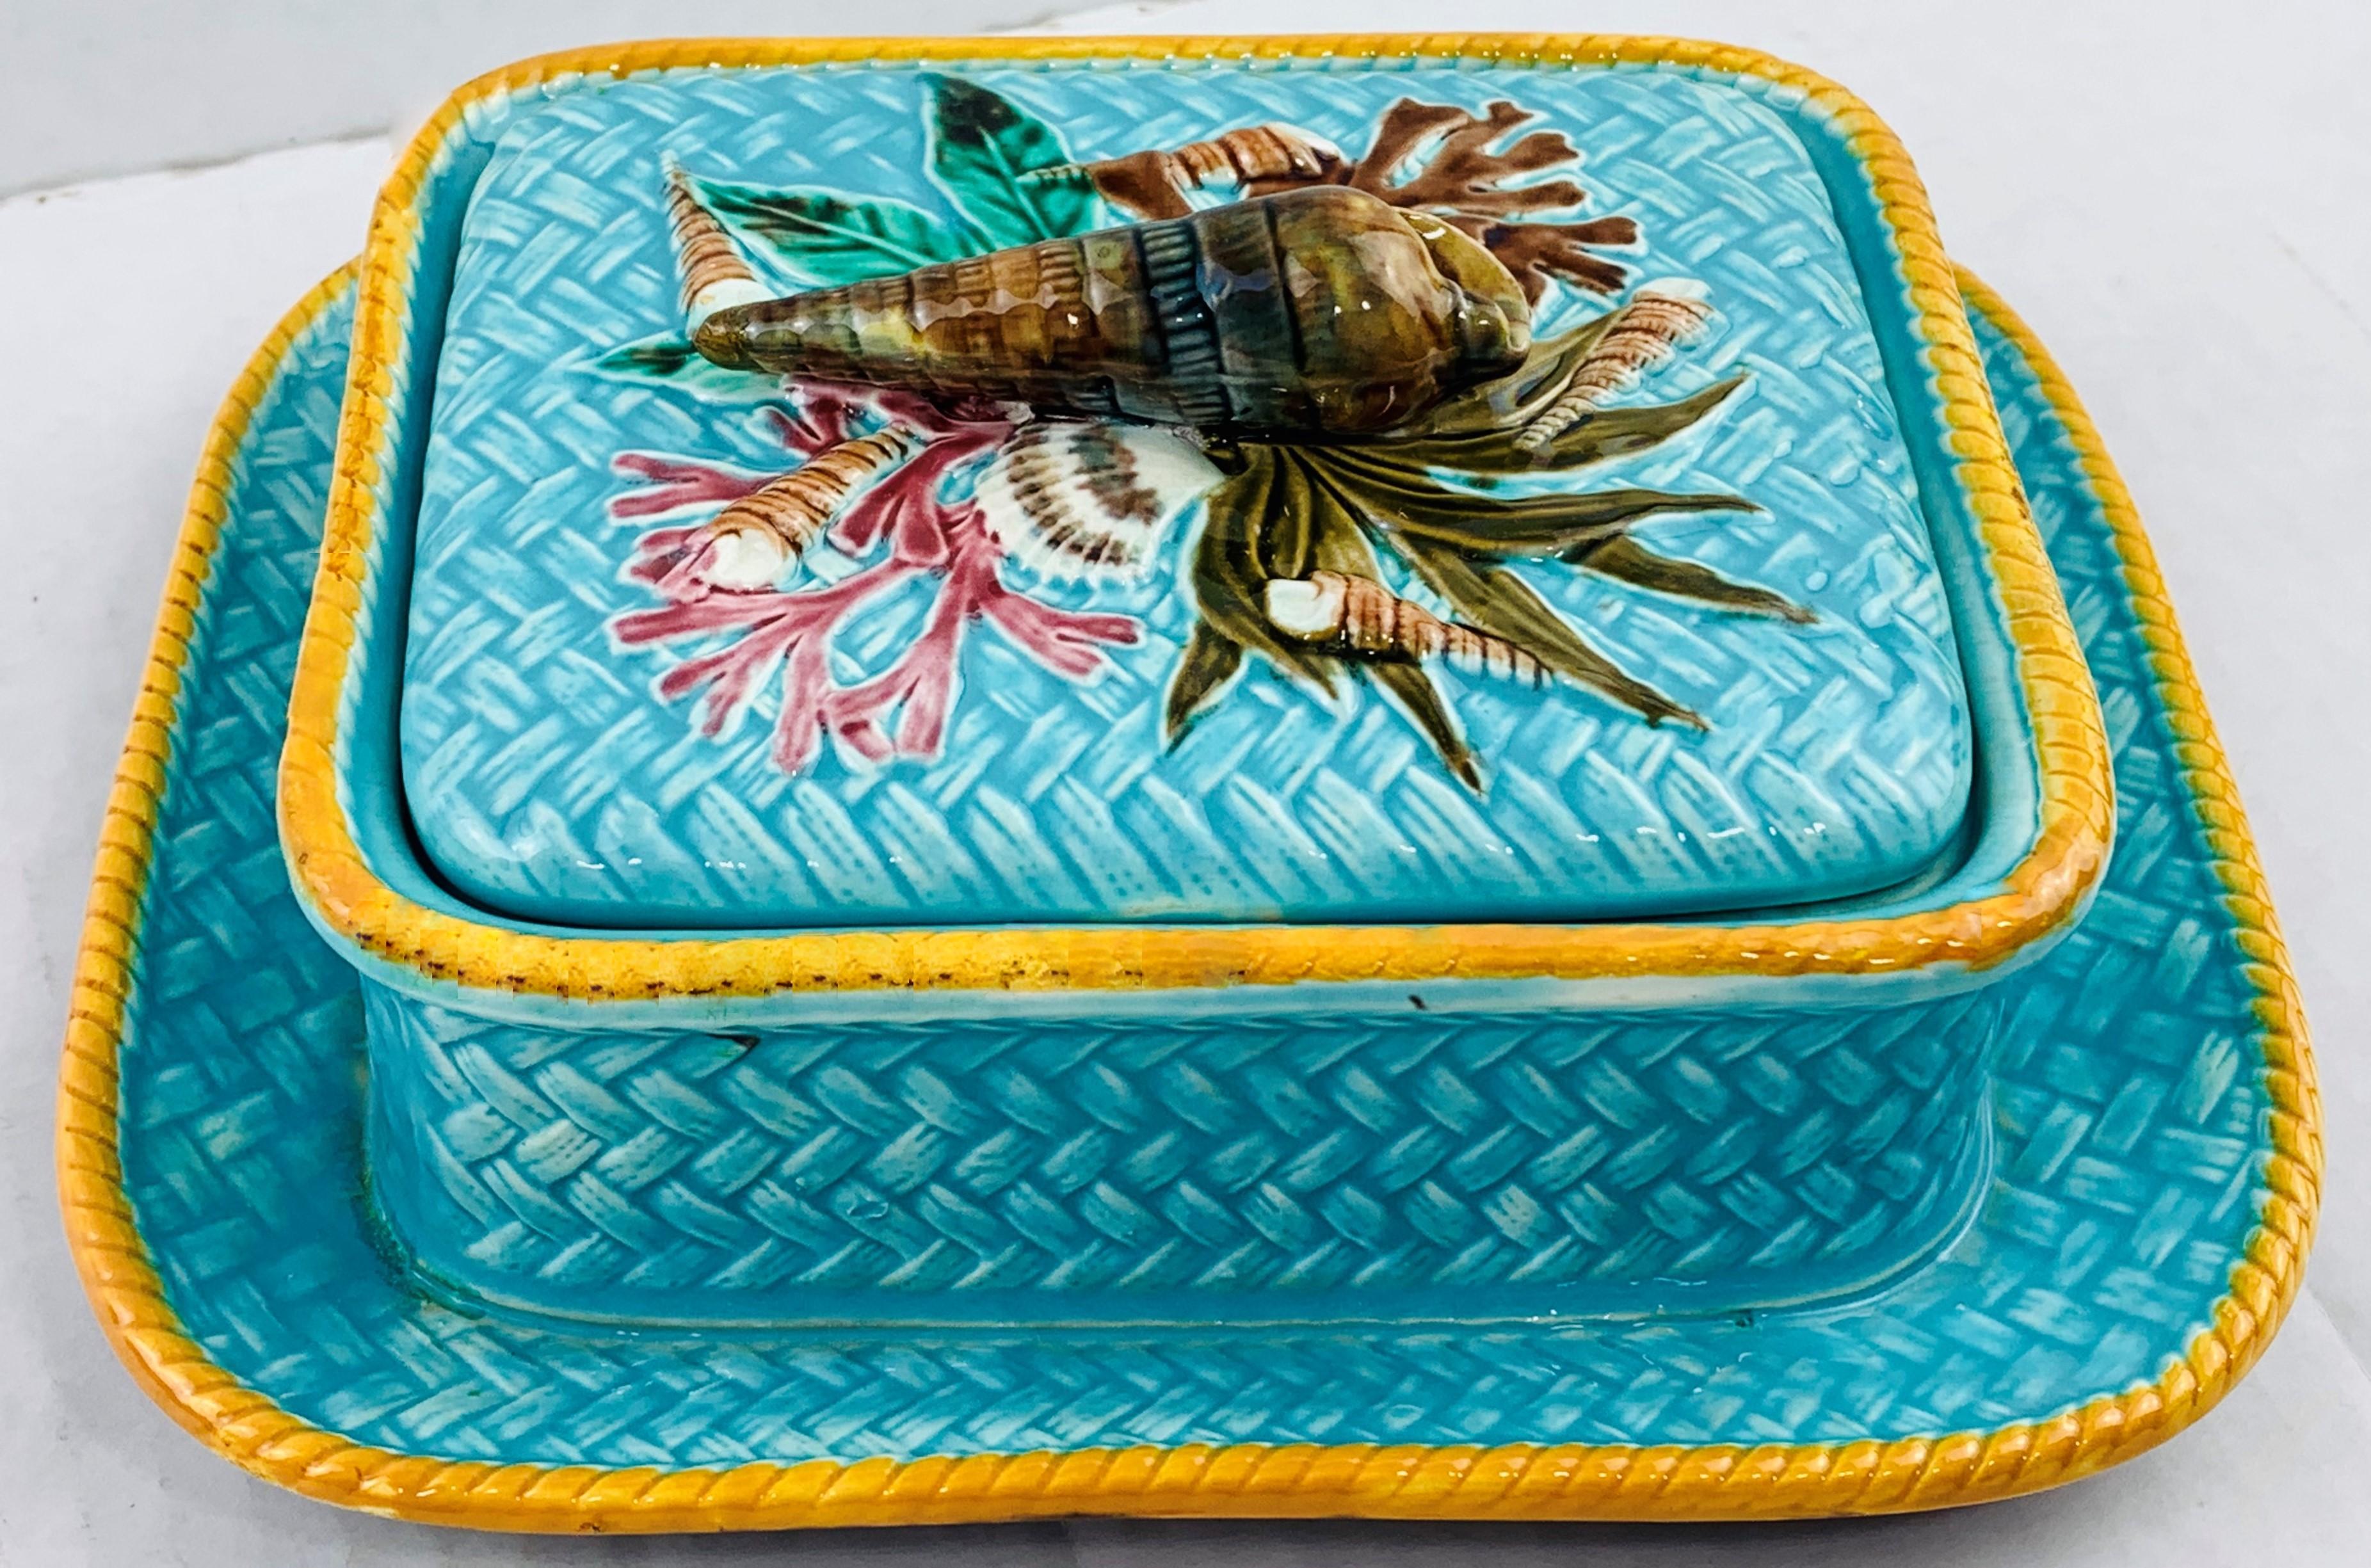 Wedgwood Majolica sardine box shell pattern on turquoise ground wicker, English, Dated 1877. Naturalistically modeled with seashells on a bed of seaweeds and coral, surmounted with a three- dimensional whelk shell forming the handle, on a simulated